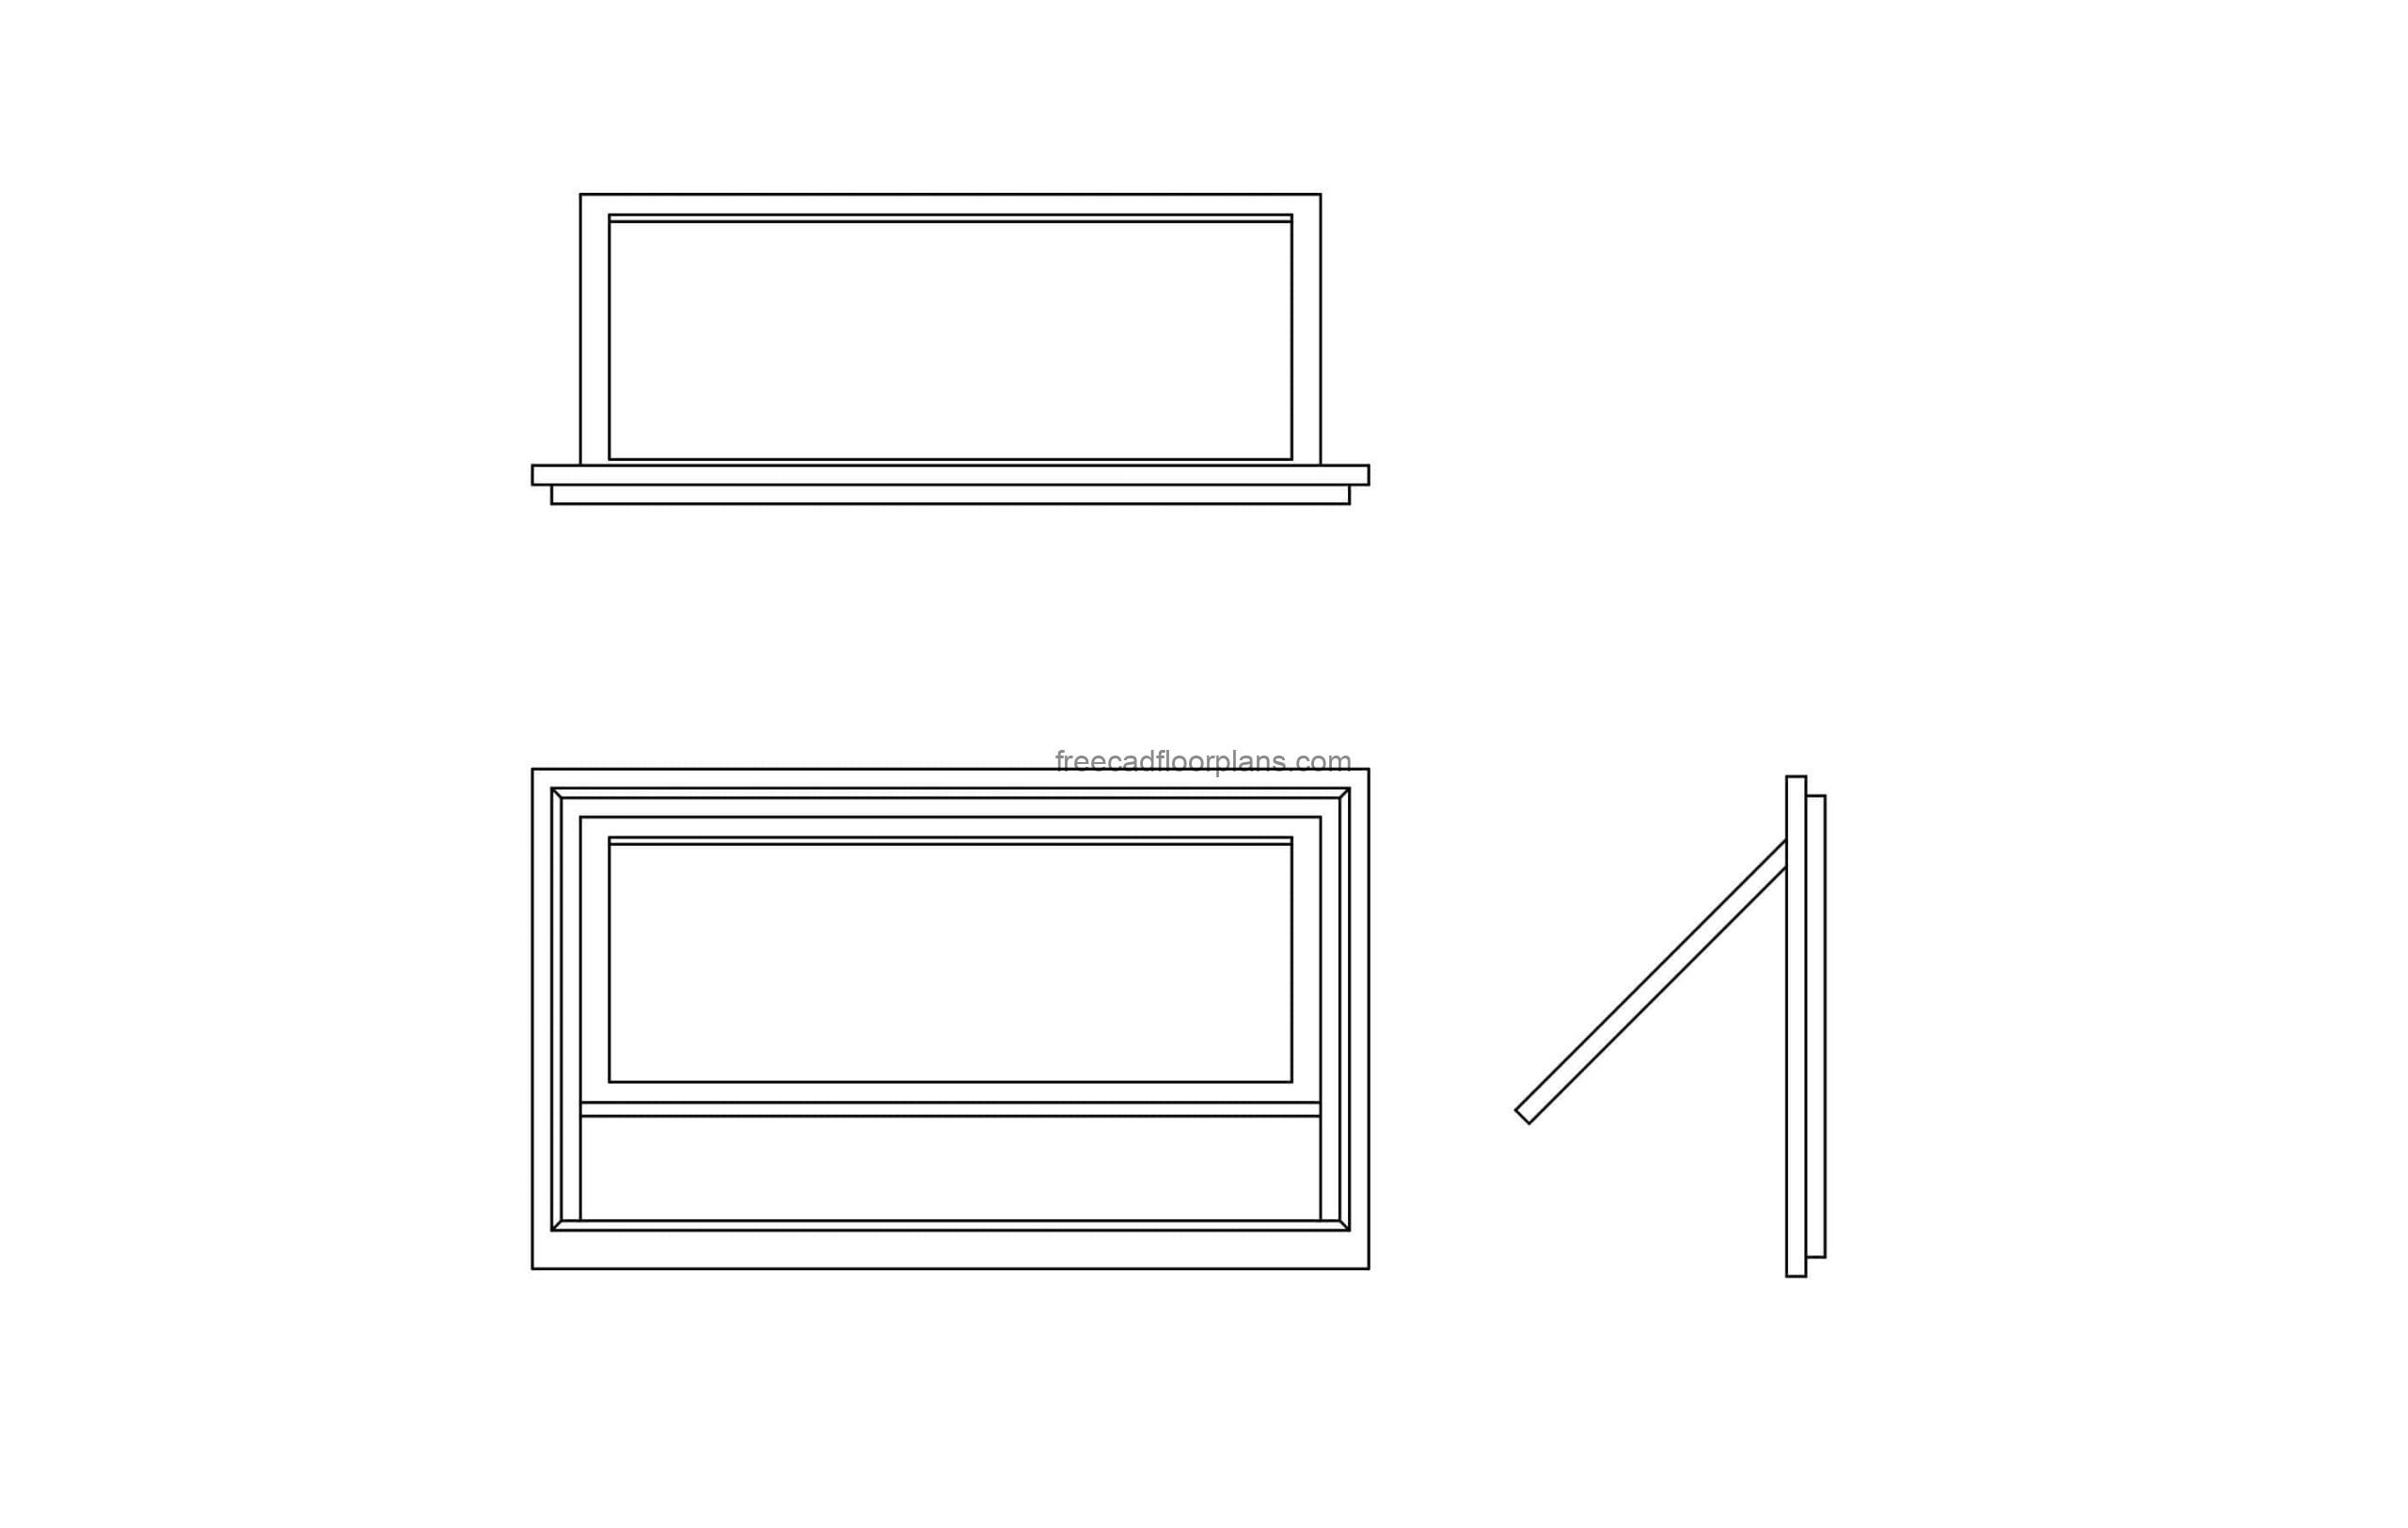 awning window cad block drawing elevation, side and plan views in 2d, dwg model for free download